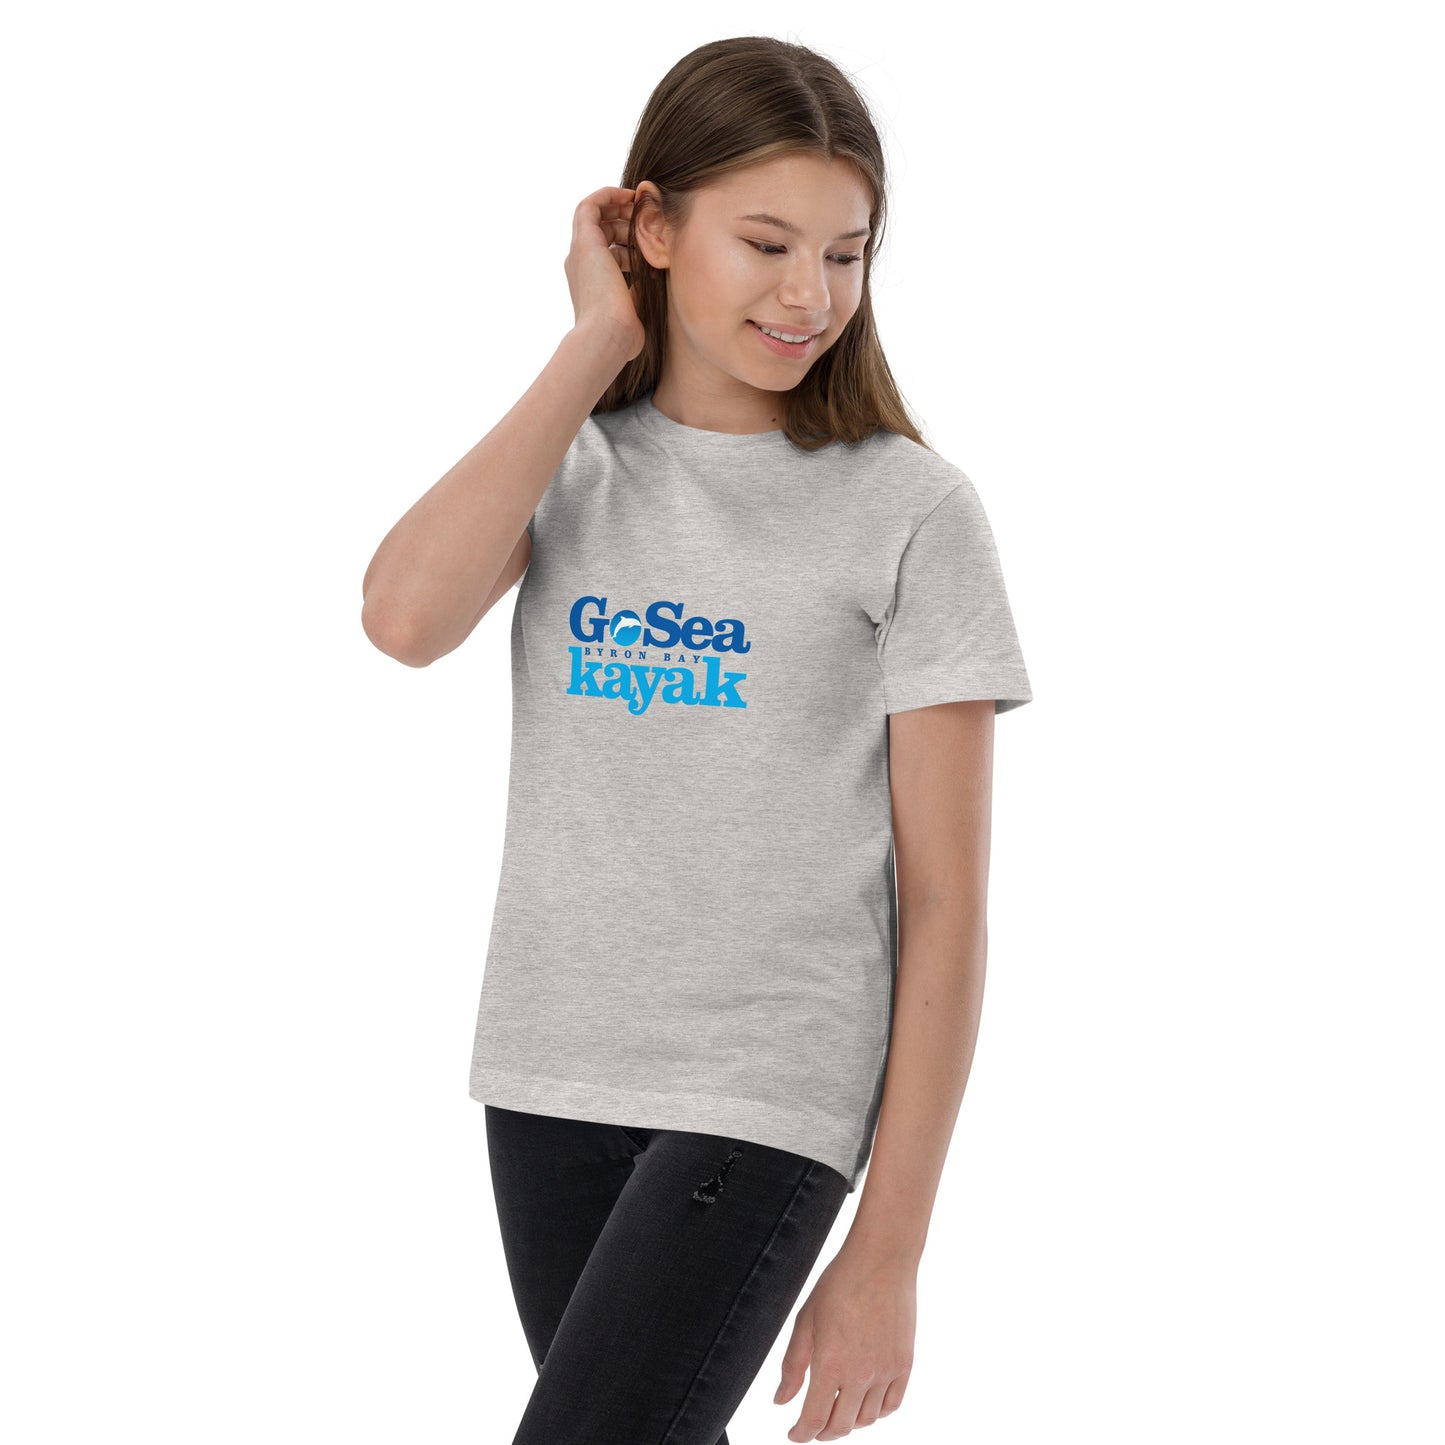  Kids T-Shirt - Natural / Heather colour - Front view, being warn on a girl standing with one arm by her side the other pushing her hair back - Go Sea Kayak Byron Bay logo on front - Genuine Byron Bay Merchandise | Produced by Go Sea Kayak Byron Bay 